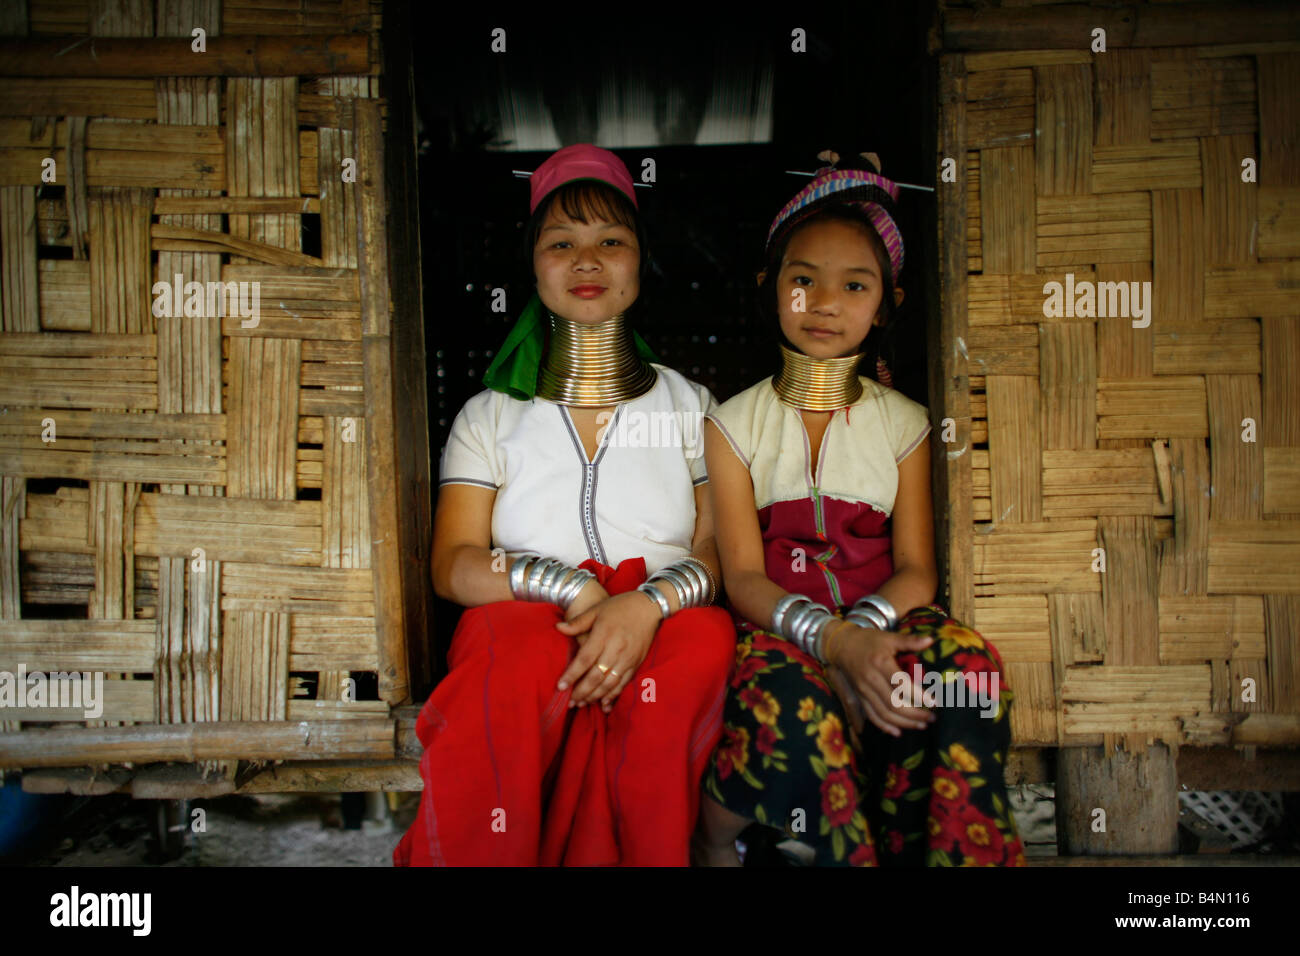 Two Longneck girls sitting outside a hut Approximately 300 Burmese refugees in Thailand are members of the indigenous group known as the Longnecks The largest of the three villages where the Longnecks live is called Nai Soi located near Mae Hong Son City Longnecks wear metal rings on their necks which push the collarbone down and extend the neck They are a tourist attraction Tourists visit Nai Soi to take pictures of the Longnecks and buy their handicrafts The villages are criticized by human rights organizations as human zoos Stock Photo